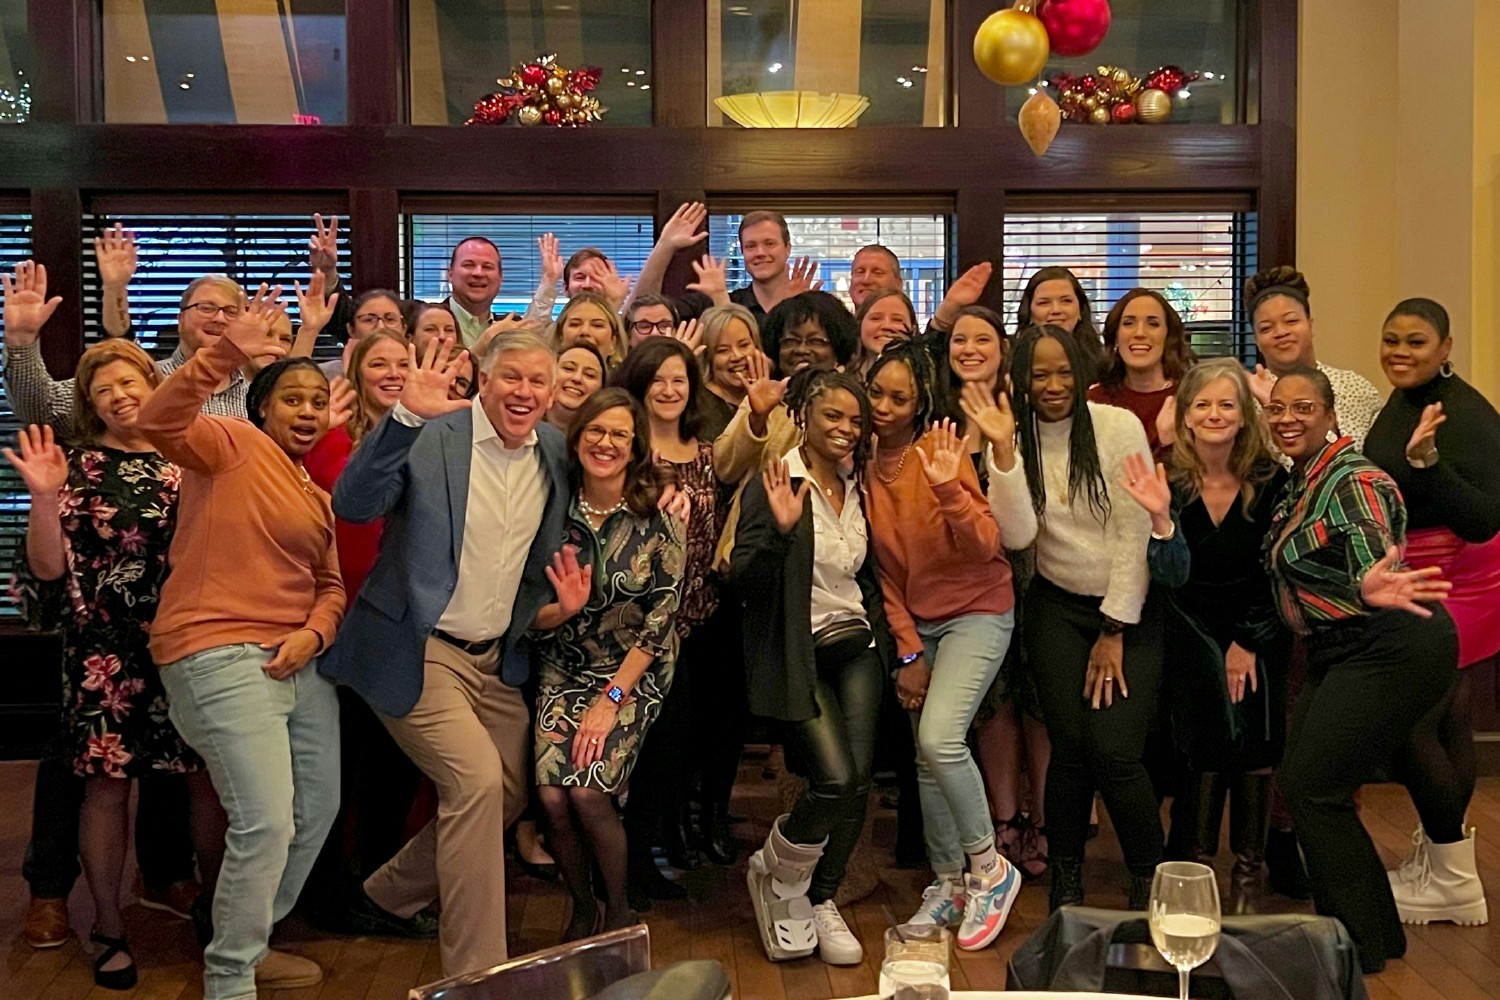 Celebrating the the end of a GREAT 2022 year & holidays with our office team members!